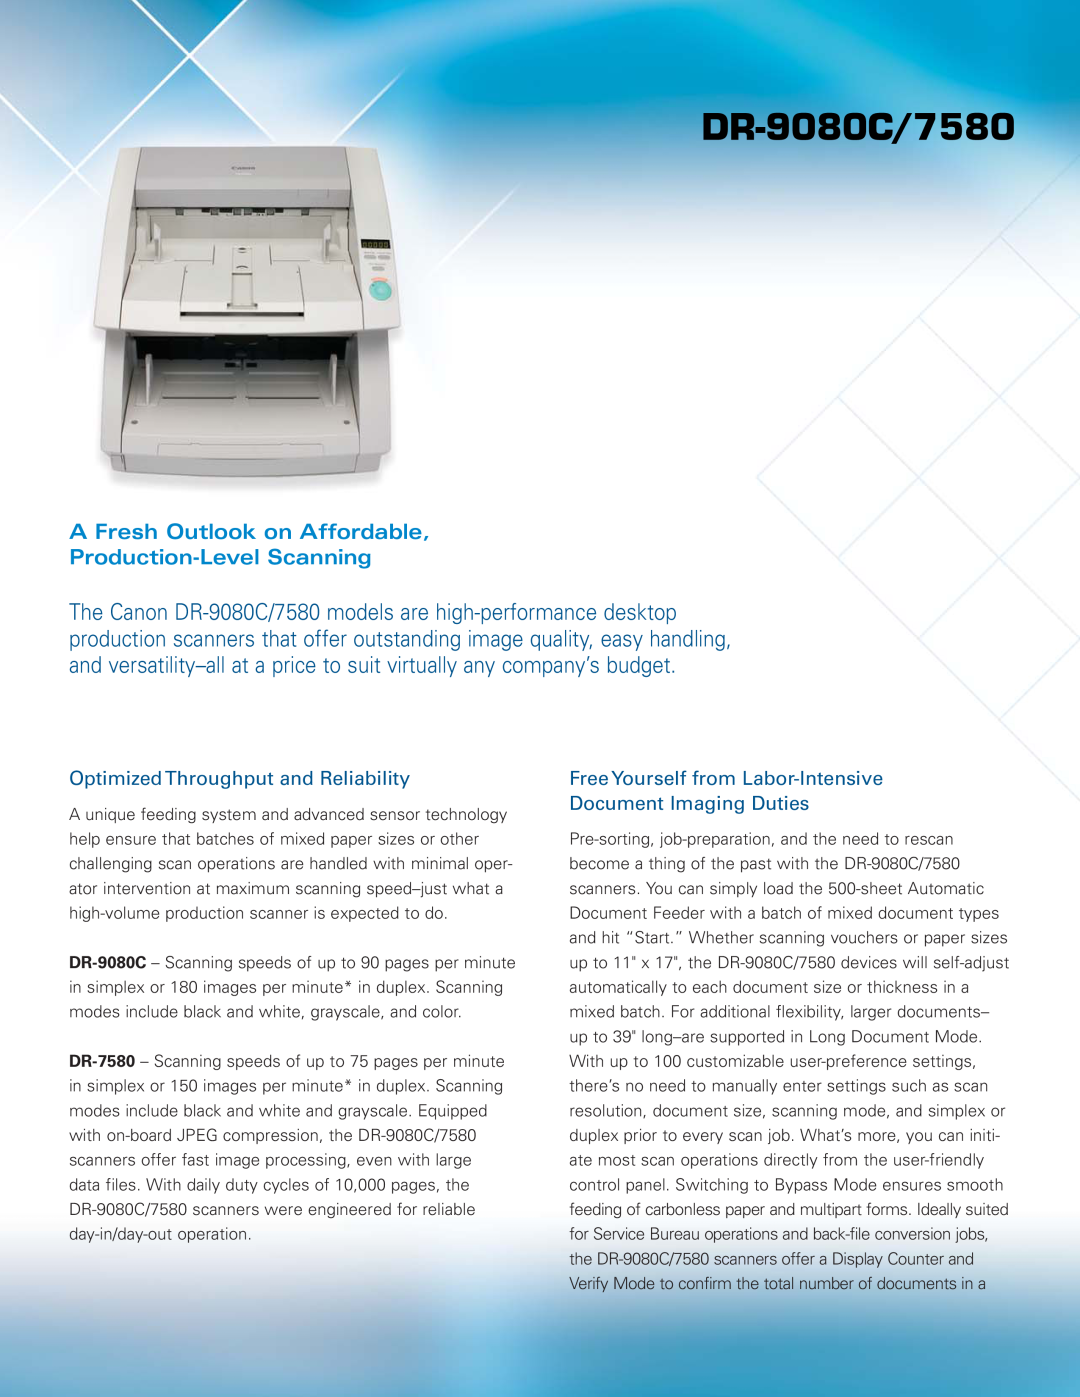 Canon DR-9080C manual A Fresh Outlook on Affordable Production-Level Scanning, Optimized Throughput and Reliability 